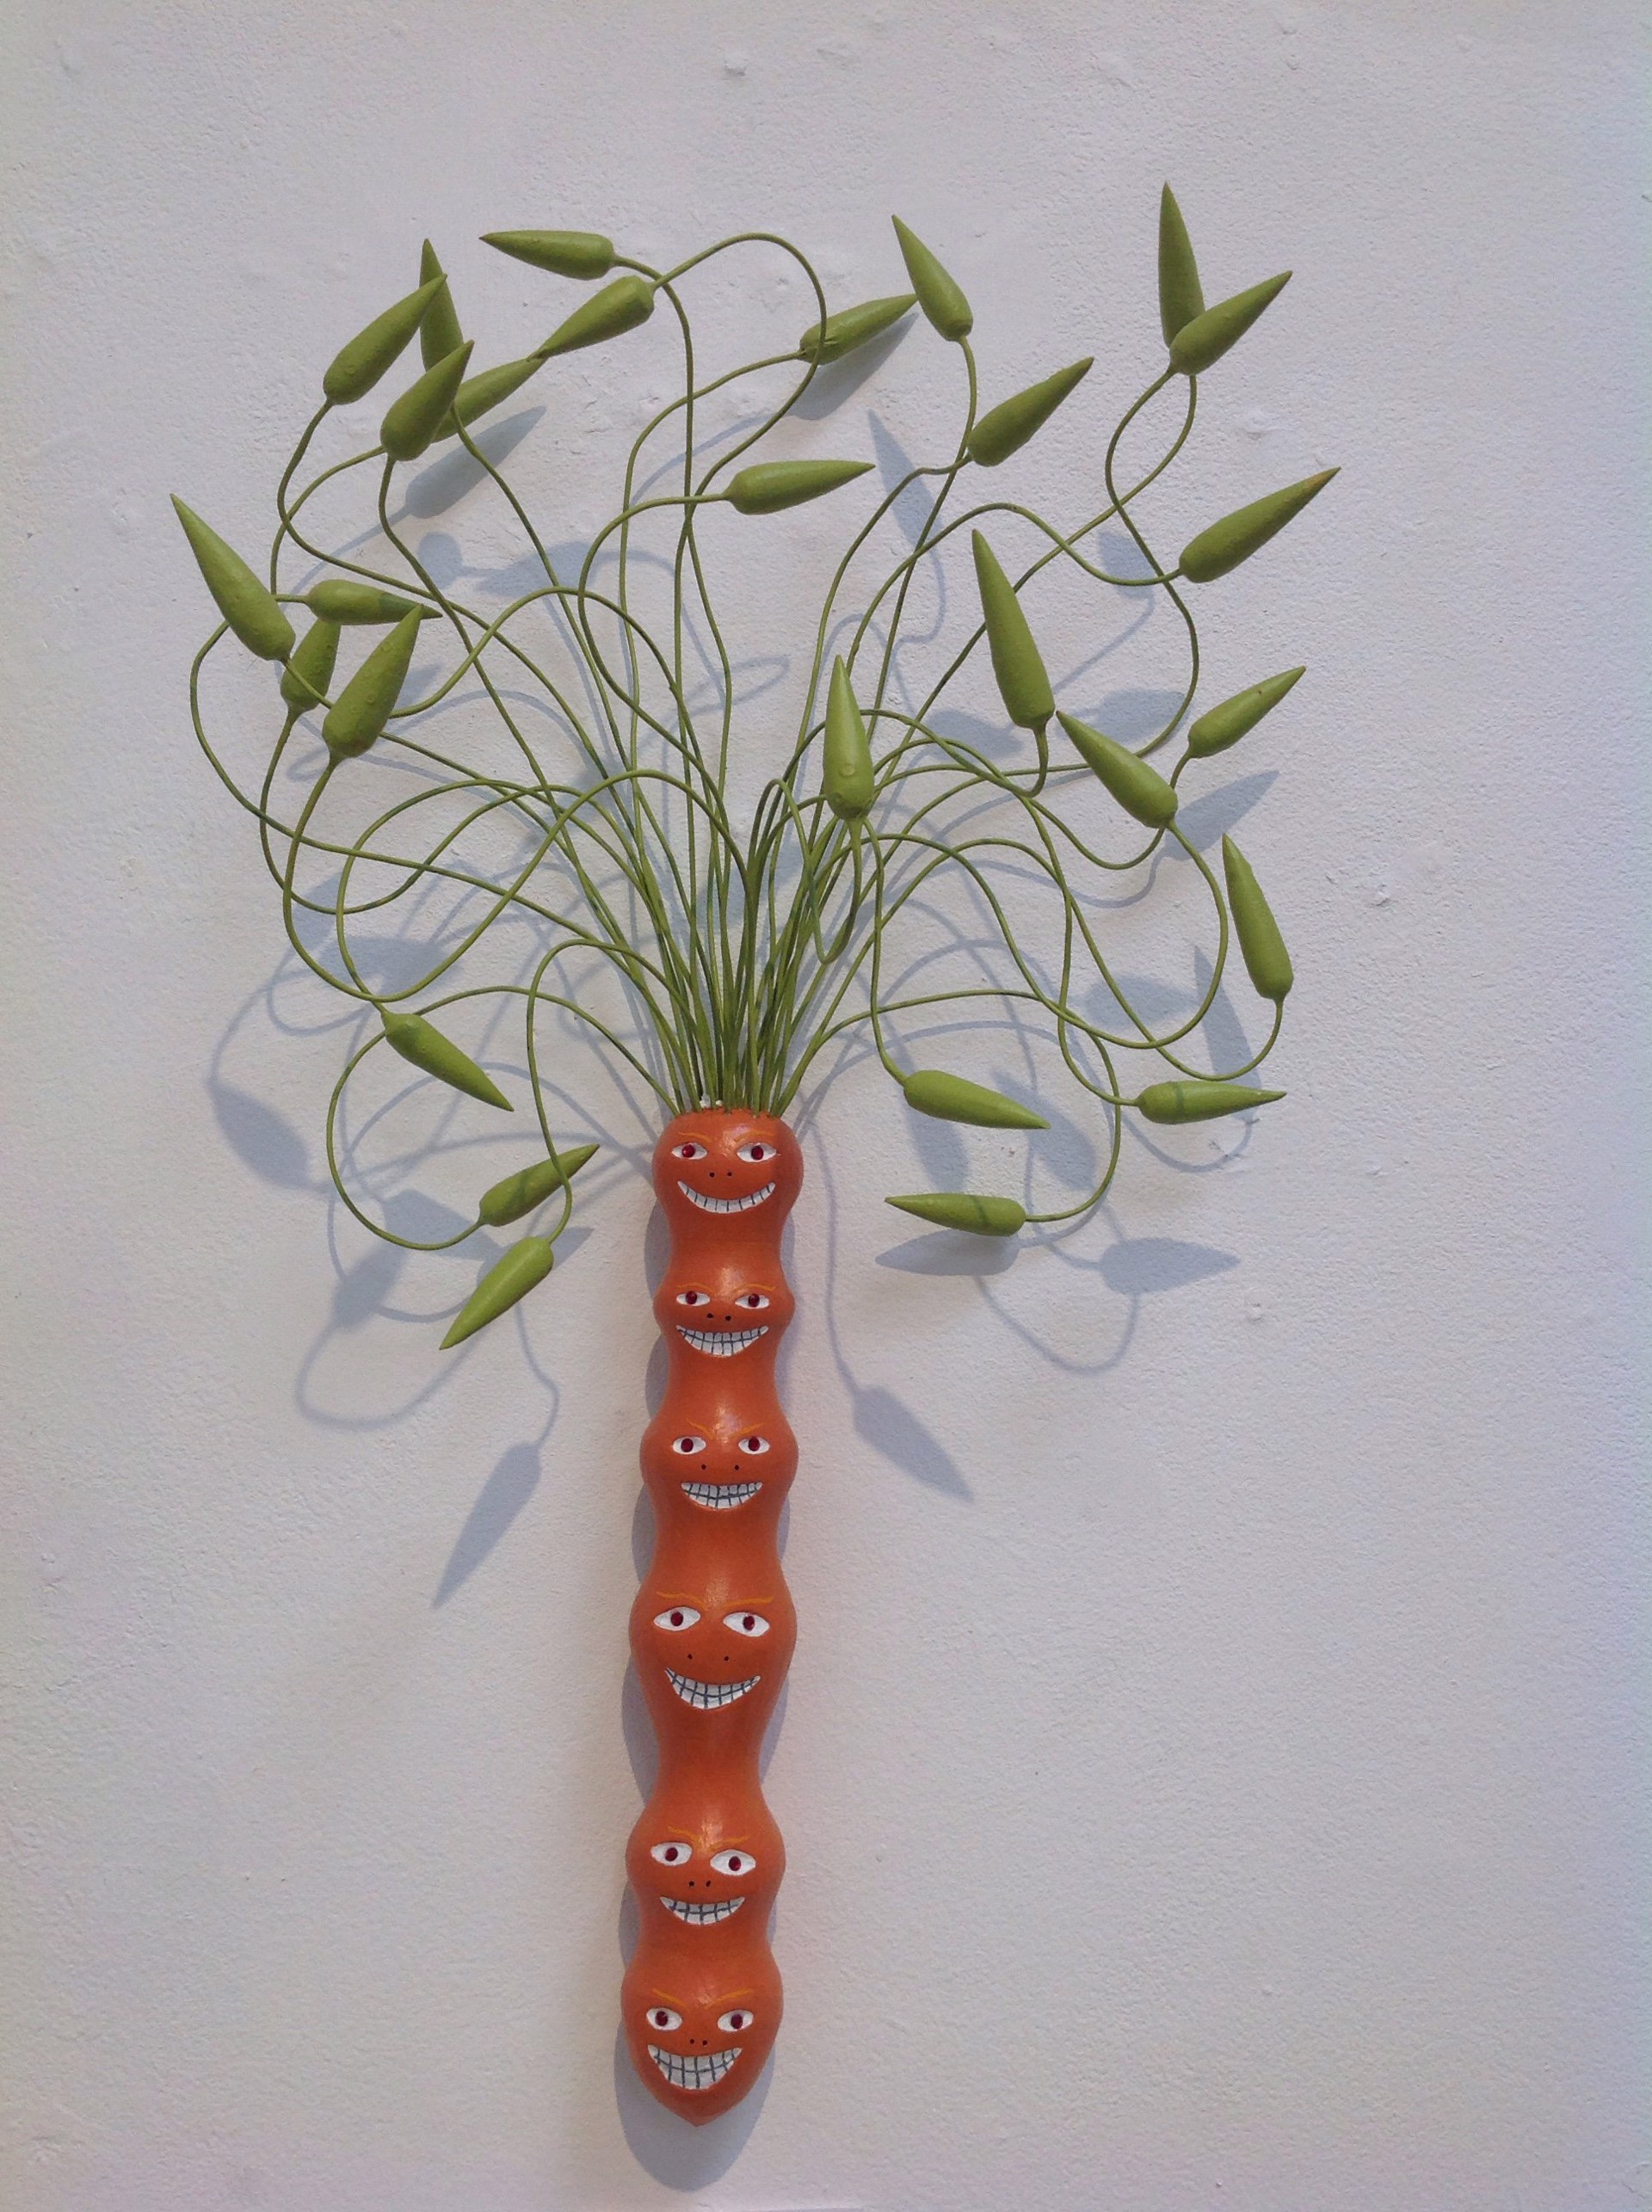 Monty Santo the Multiple Personality GMO Carrot by Hillary Pfeifer